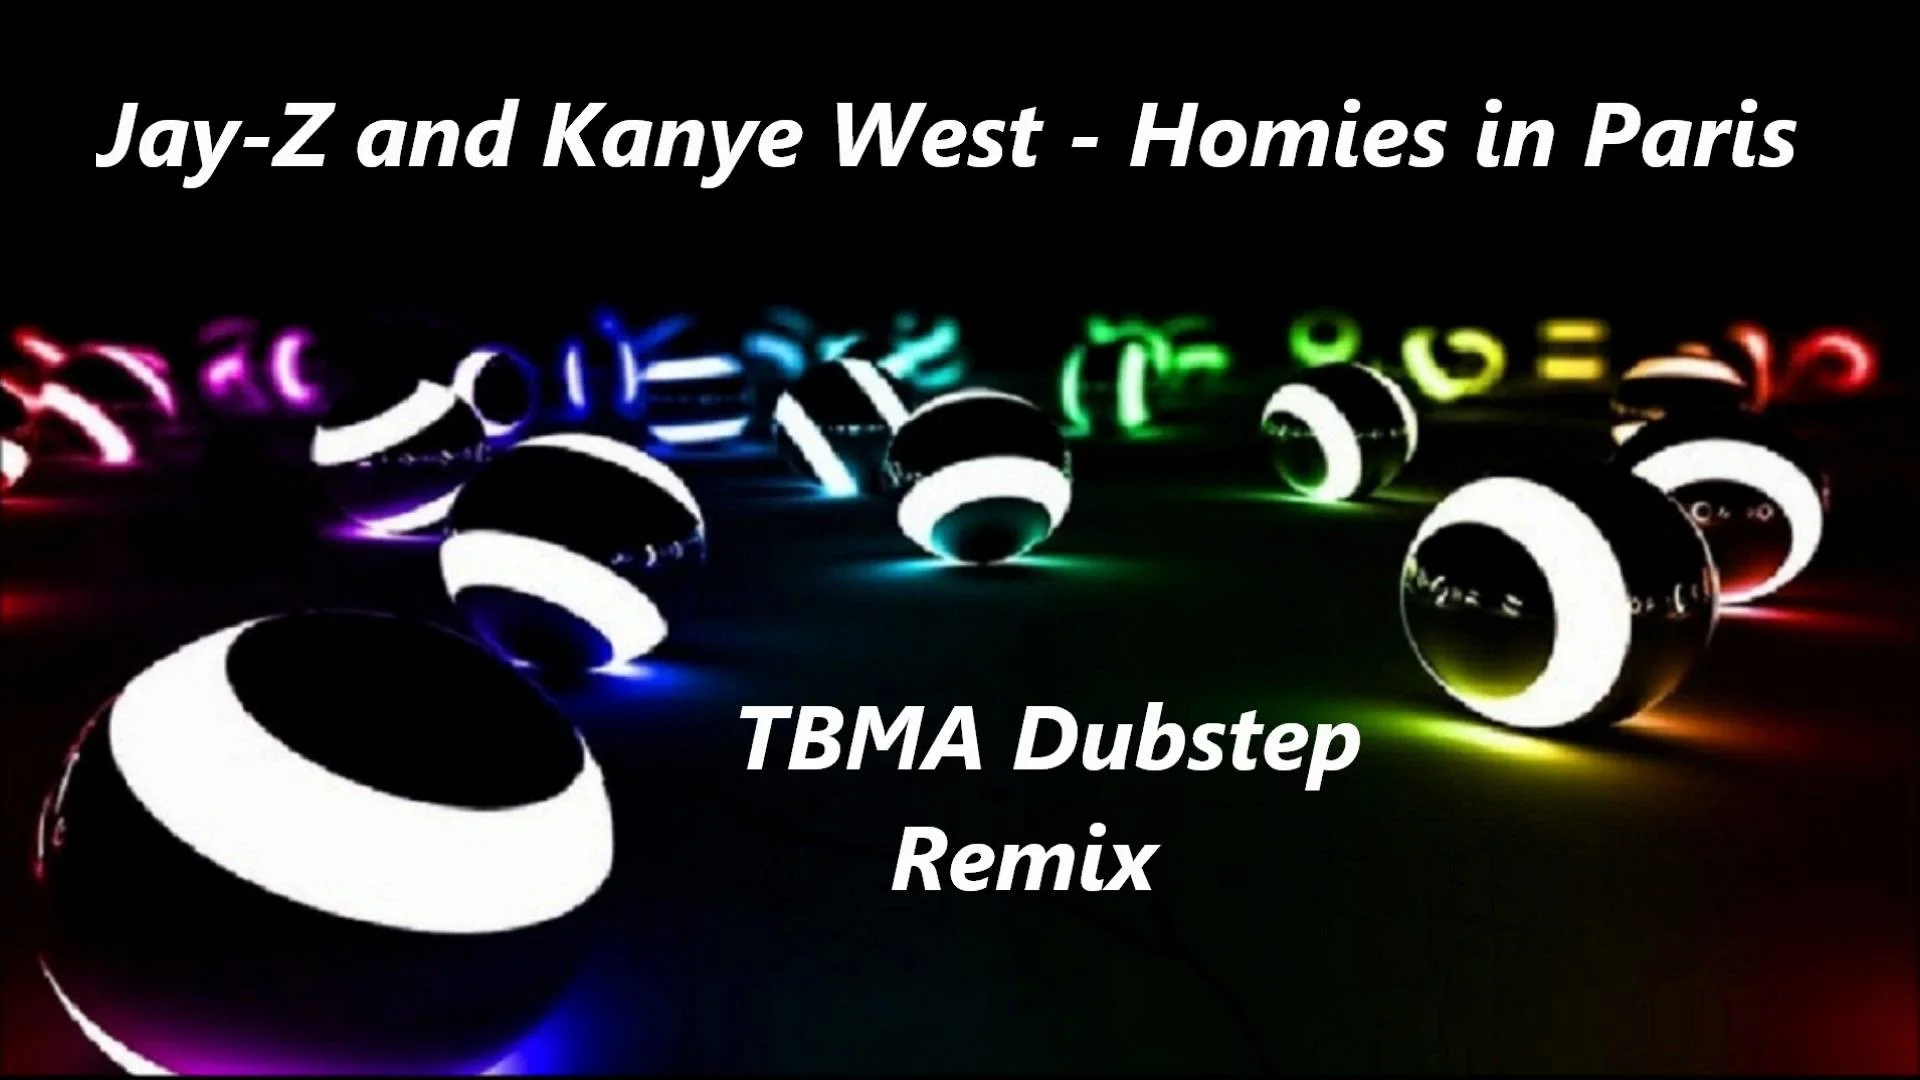 Jay Z and Kanye West – Homies in Paris TBMA Dubstep Remix